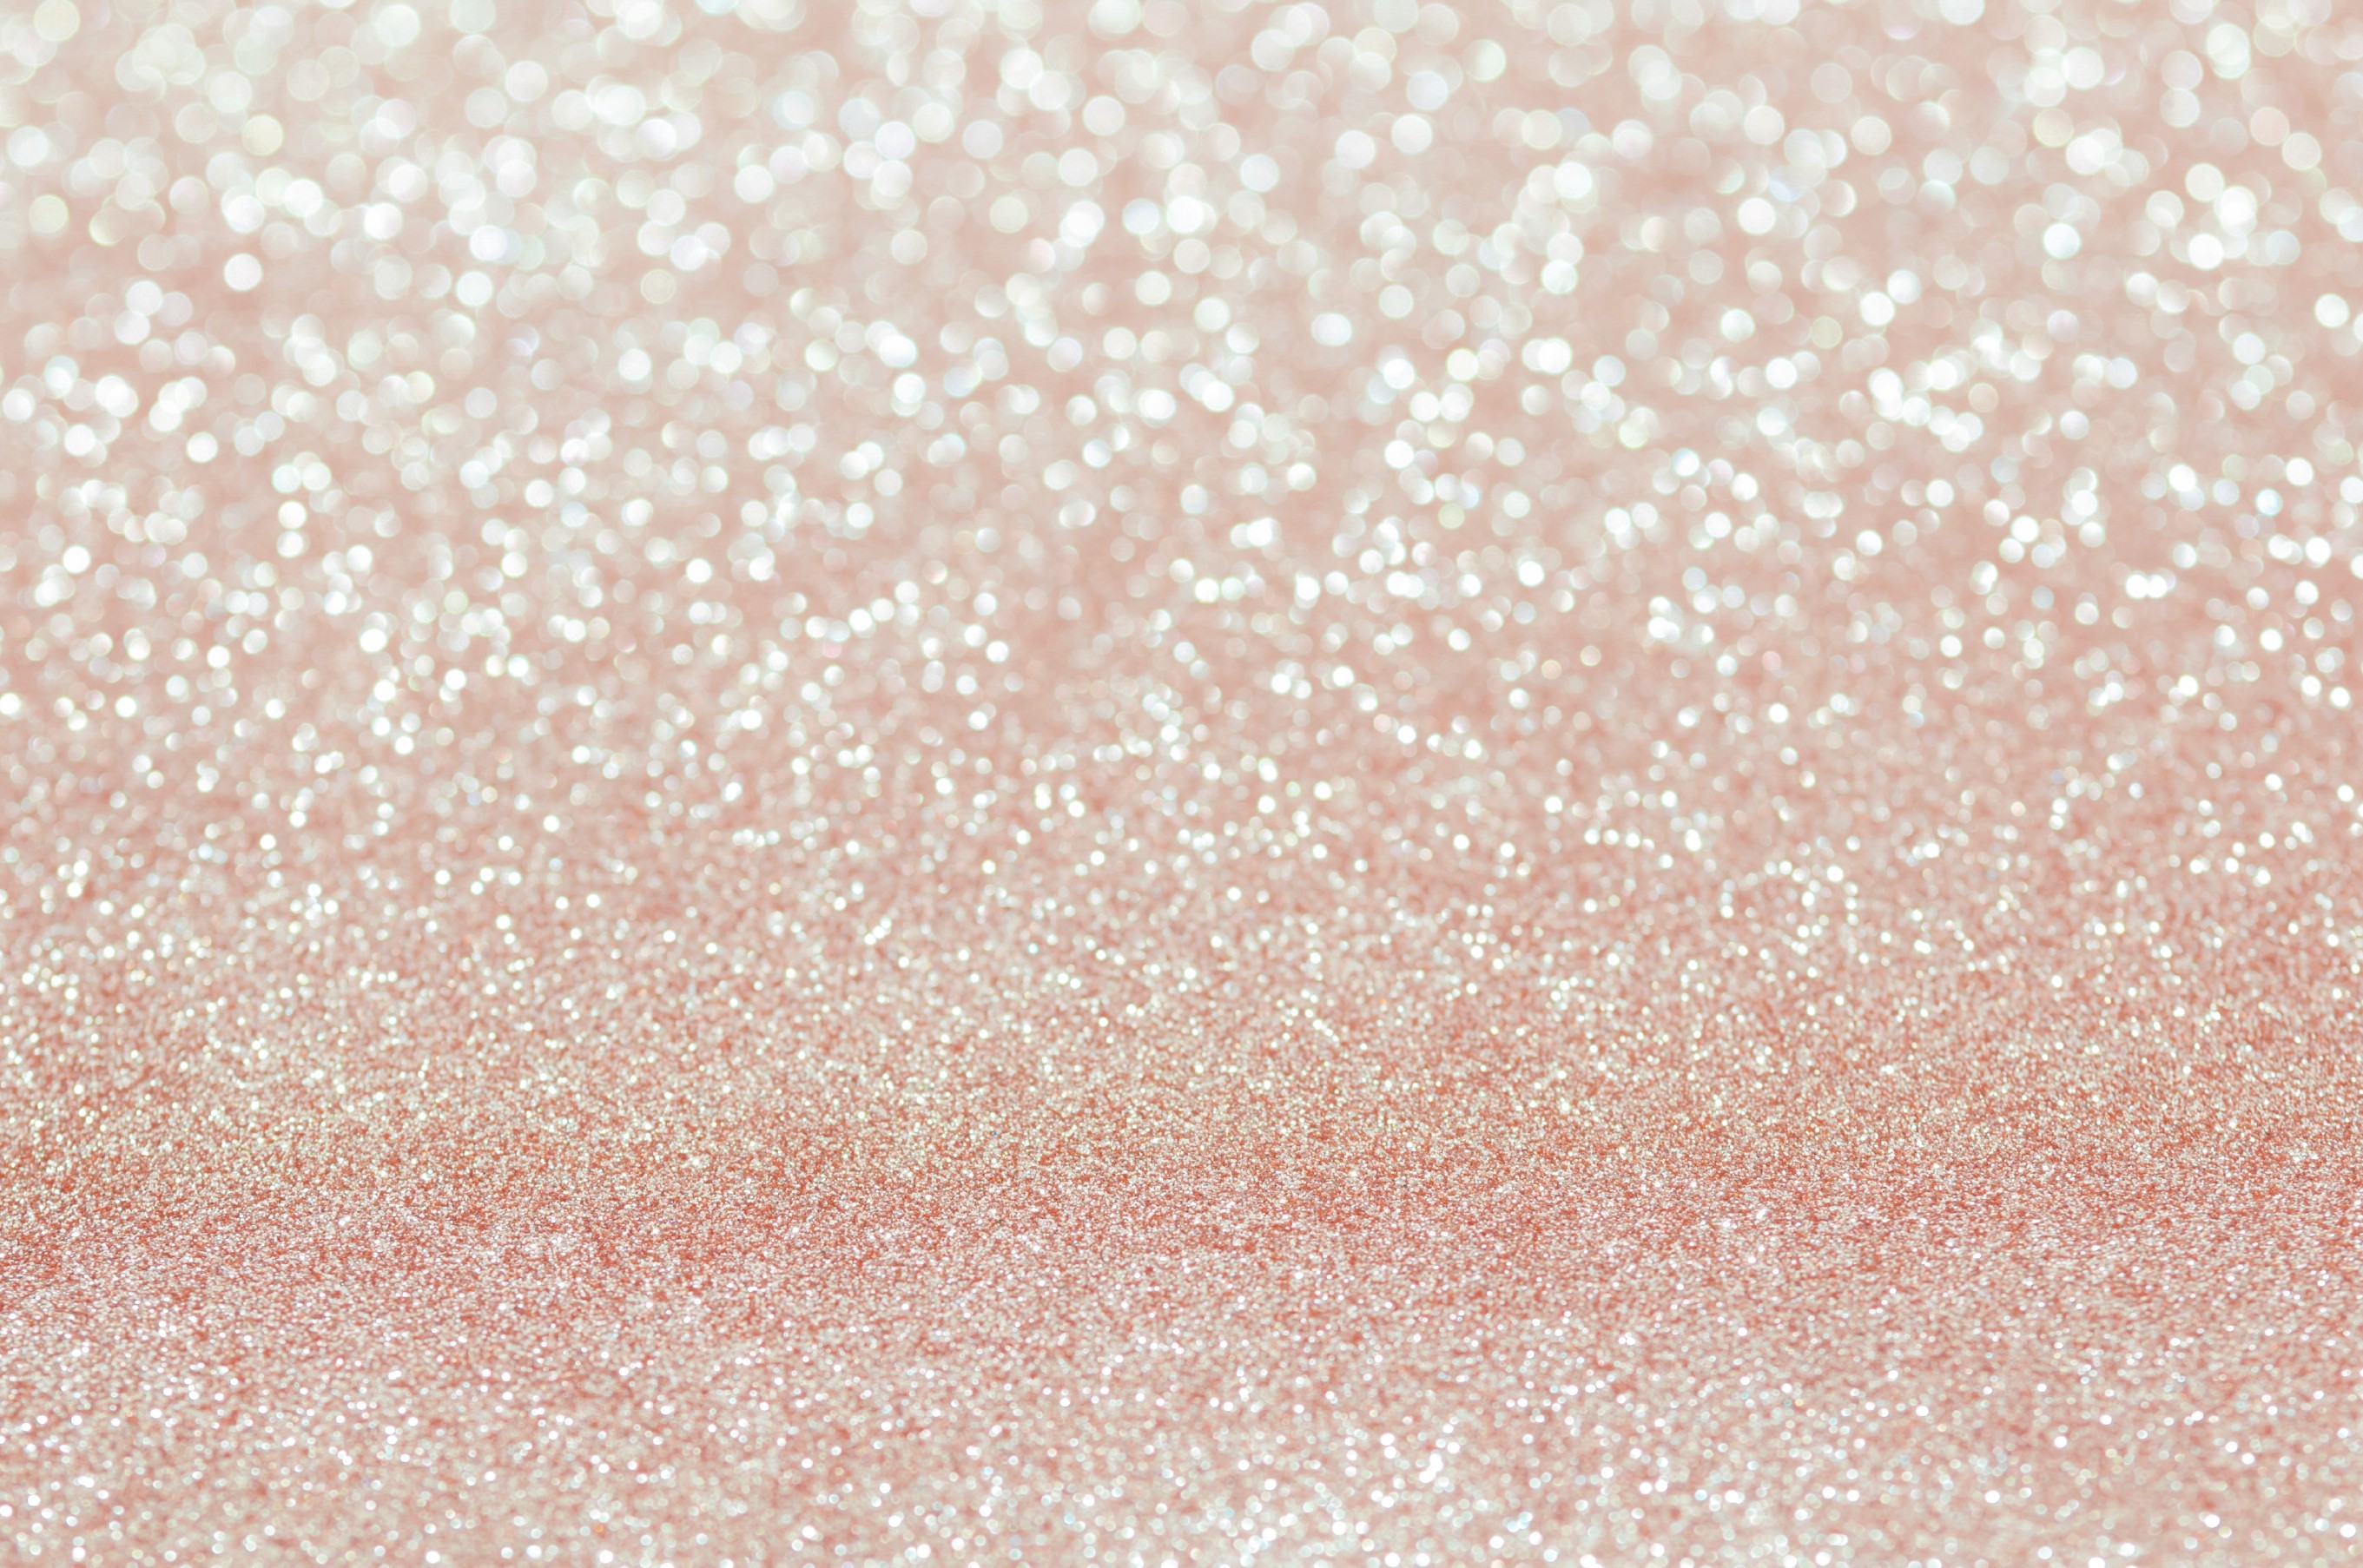 2721x1806  Glitter Background HD Wallpapers on picsfair.com